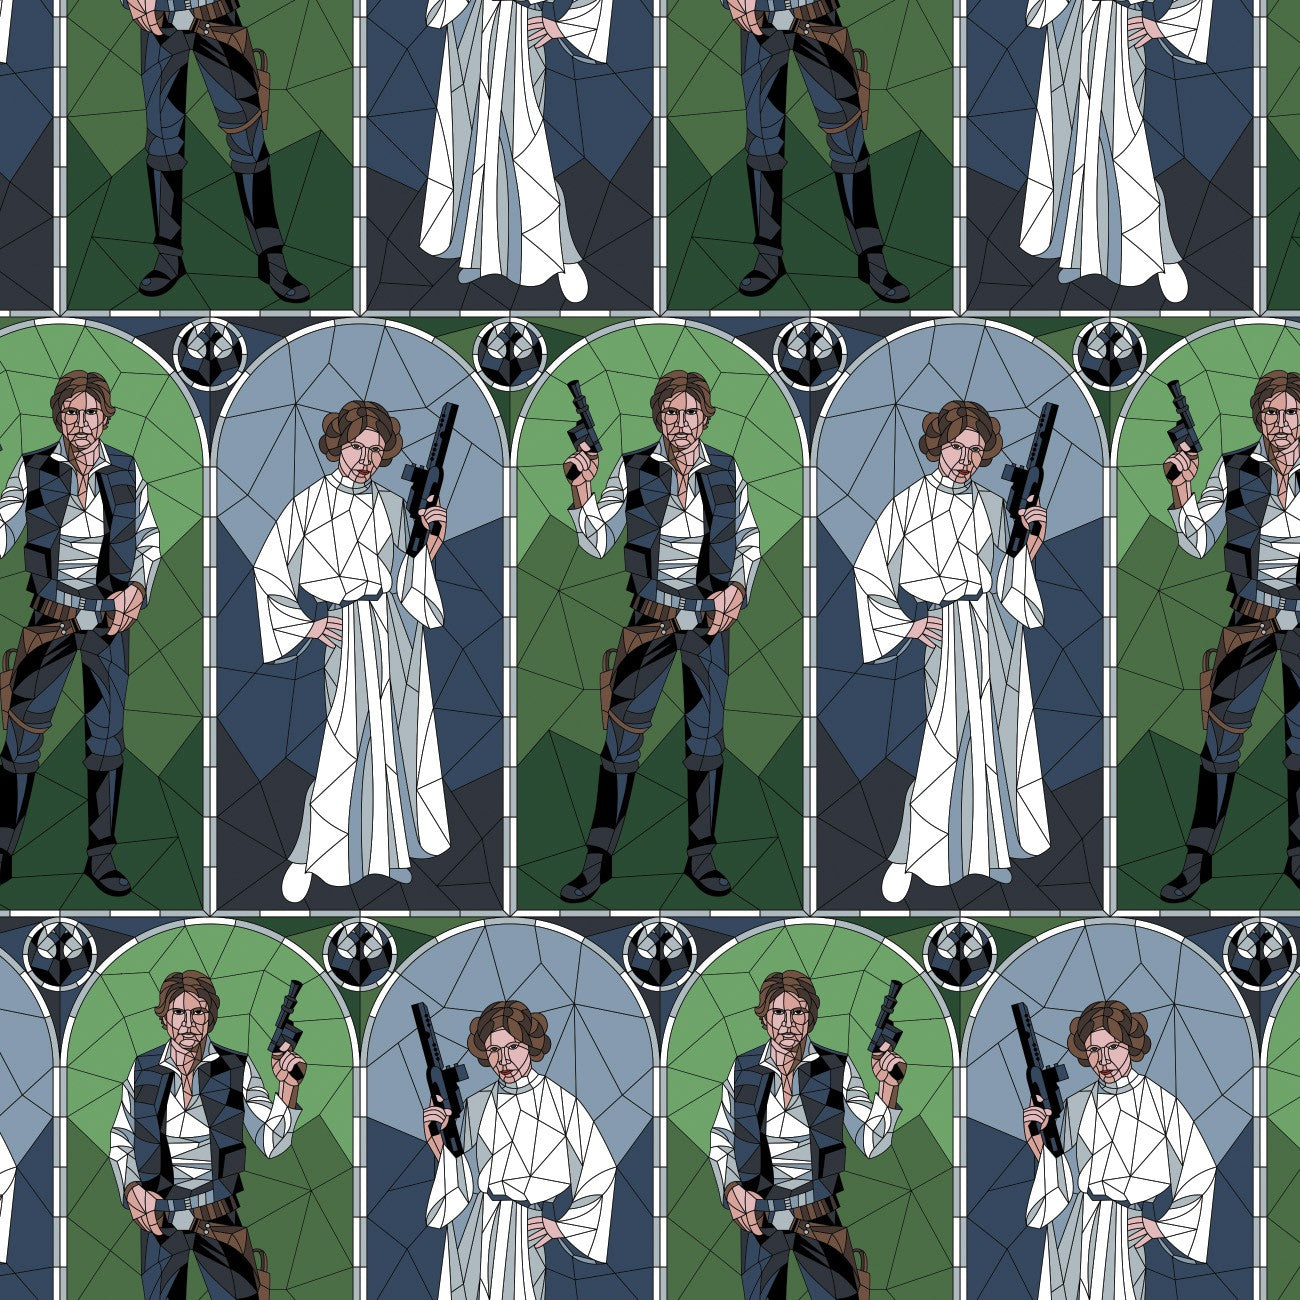 Han and Leia - Star Wars Stained Glass Cotton Print Fabric - per half metre